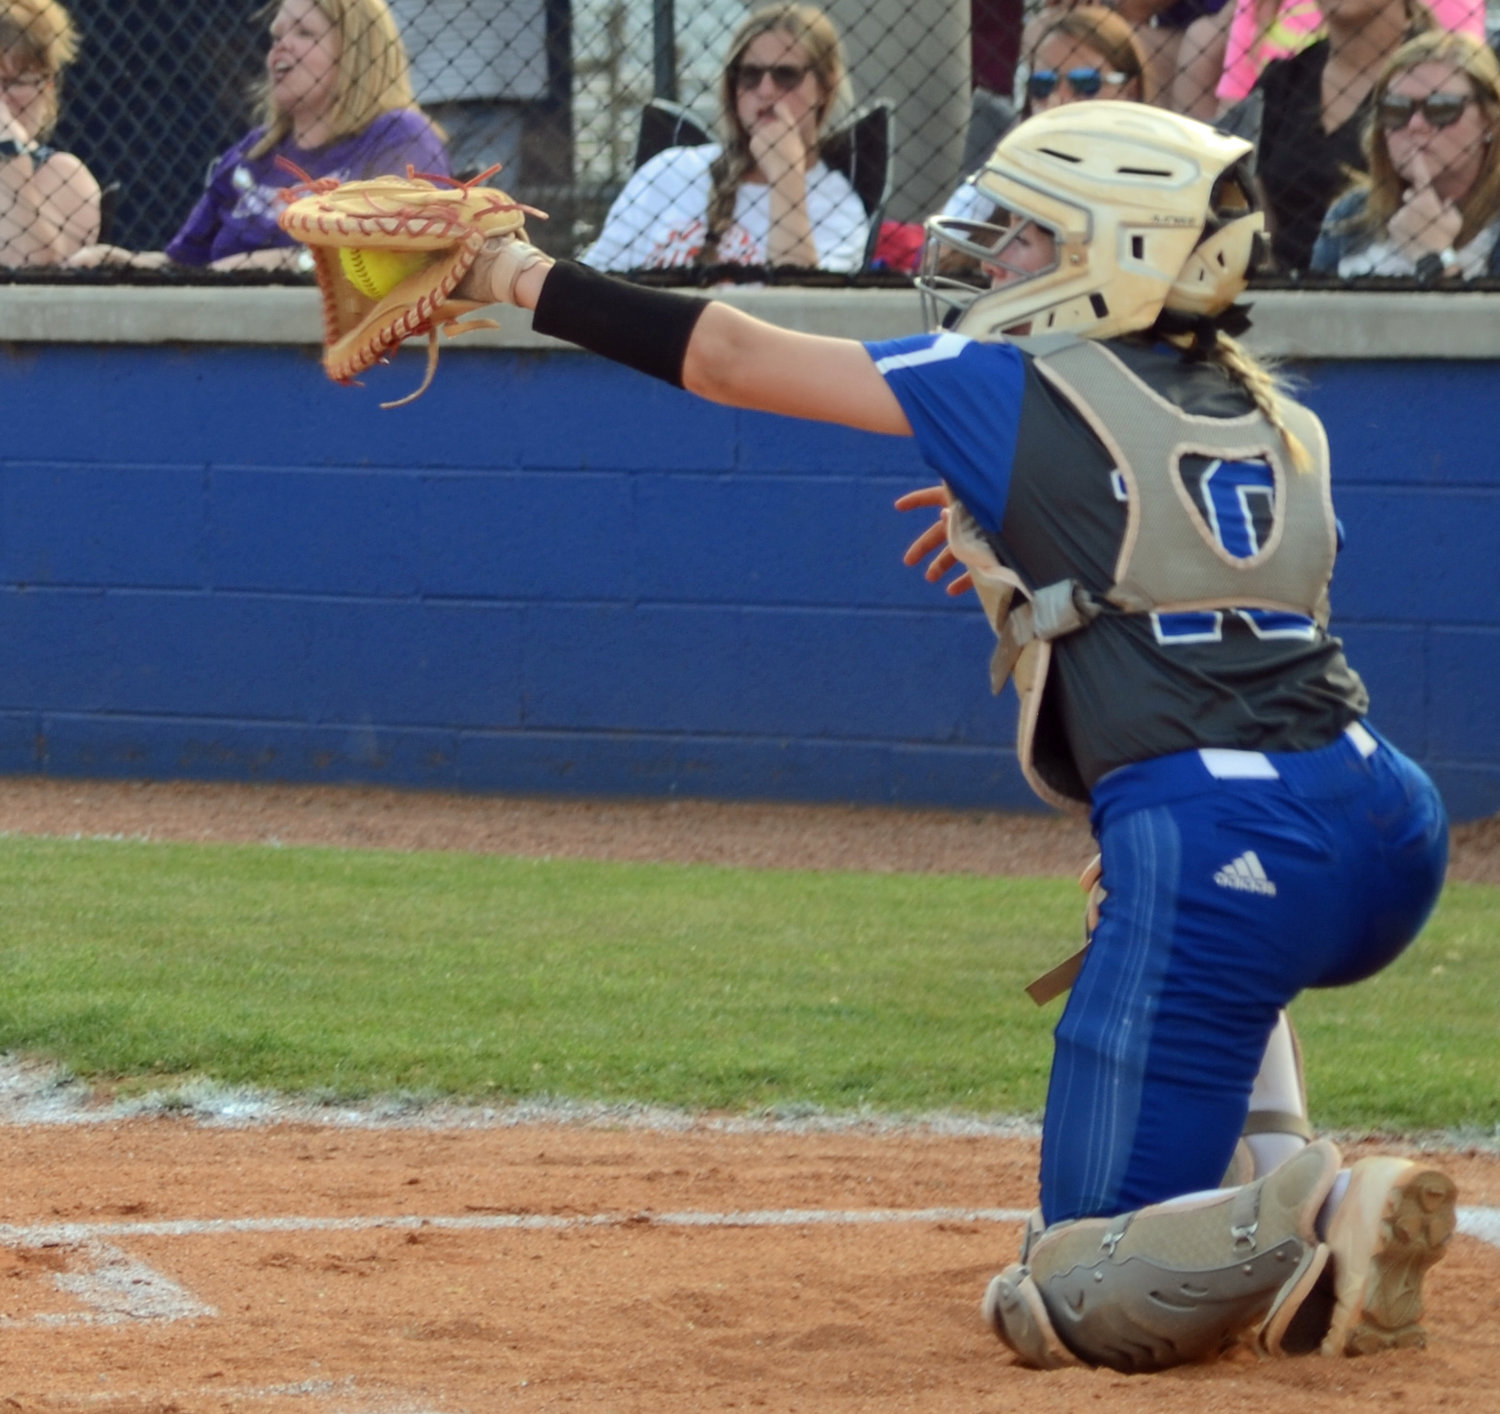 Forrest catcher Parker Wales has been a rock behind the dish and a solid threat at the plate for the Region 4-AA champion Lady Rockets.